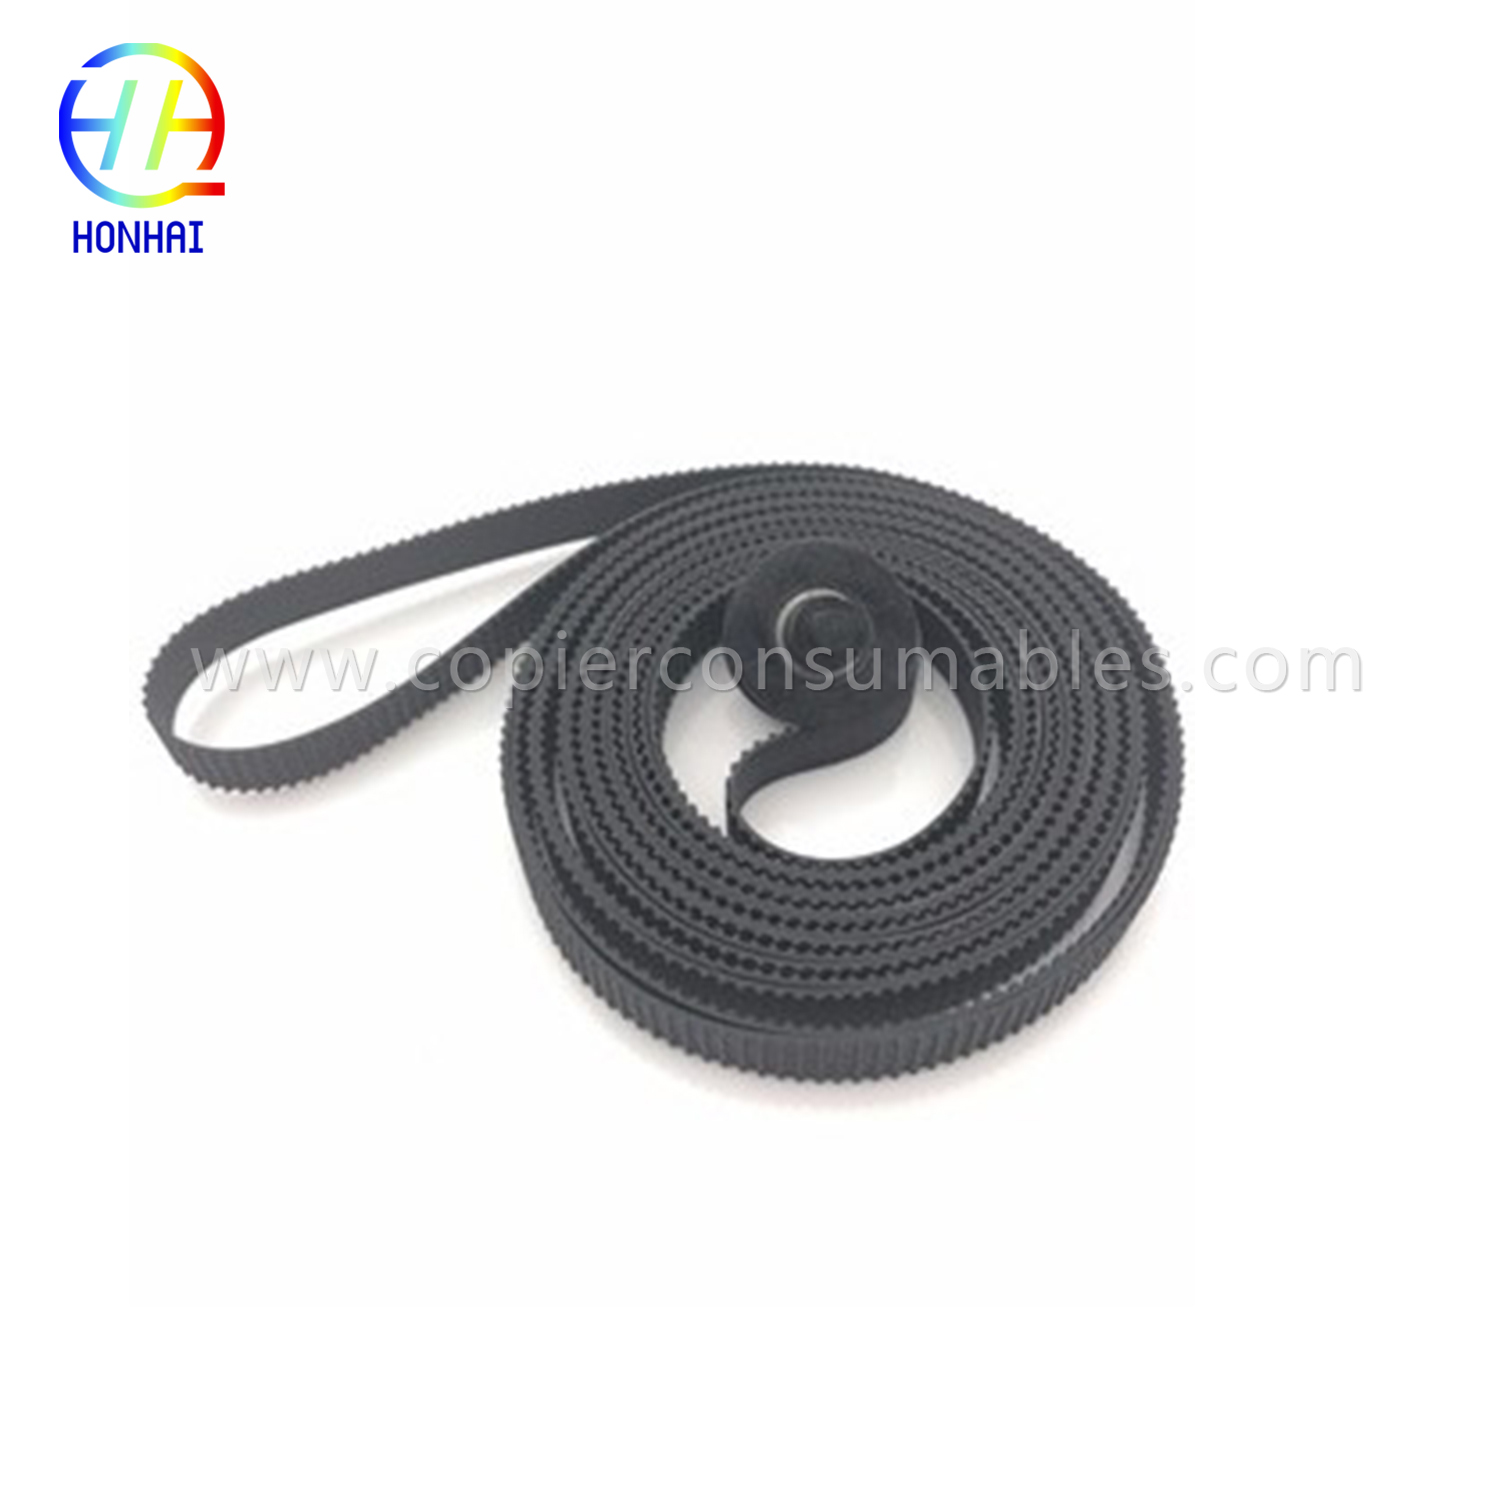 Scan Axis Carriage Belt for HP Designjet T1100 T1120 T1120PS T1200 T610 Z2100 Z2100 Z3100 Z3200 (Q6659-60175)